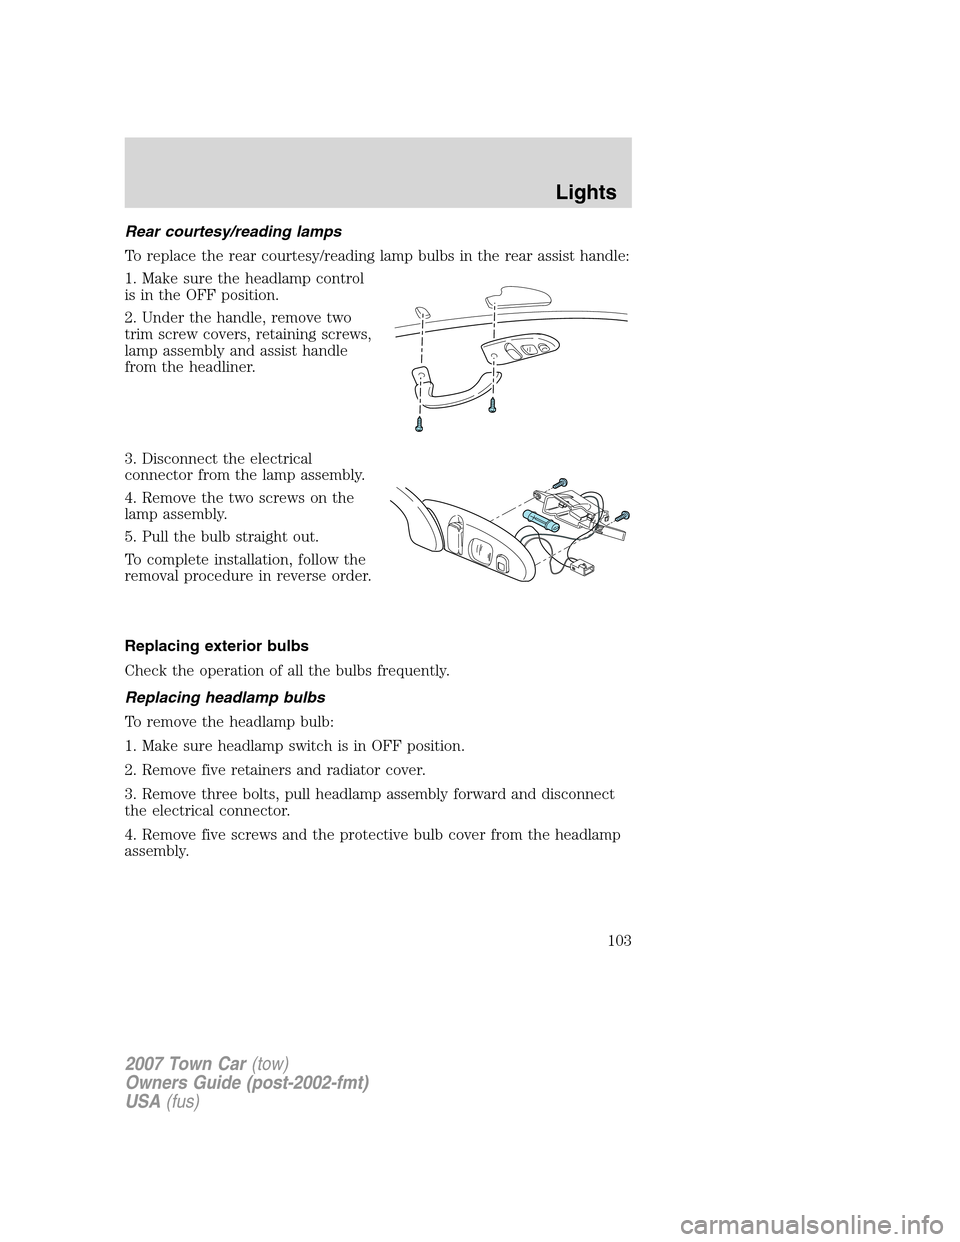 LINCOLN TOWN CAR 2007  Owners Manual Rear courtesy/reading lamps
To replace the rear courtesy/reading lamp bulbs in the rear assist handle:
1. Make sure the headlamp control
is in the OFF position.
2. Under the handle, remove two
trim sc